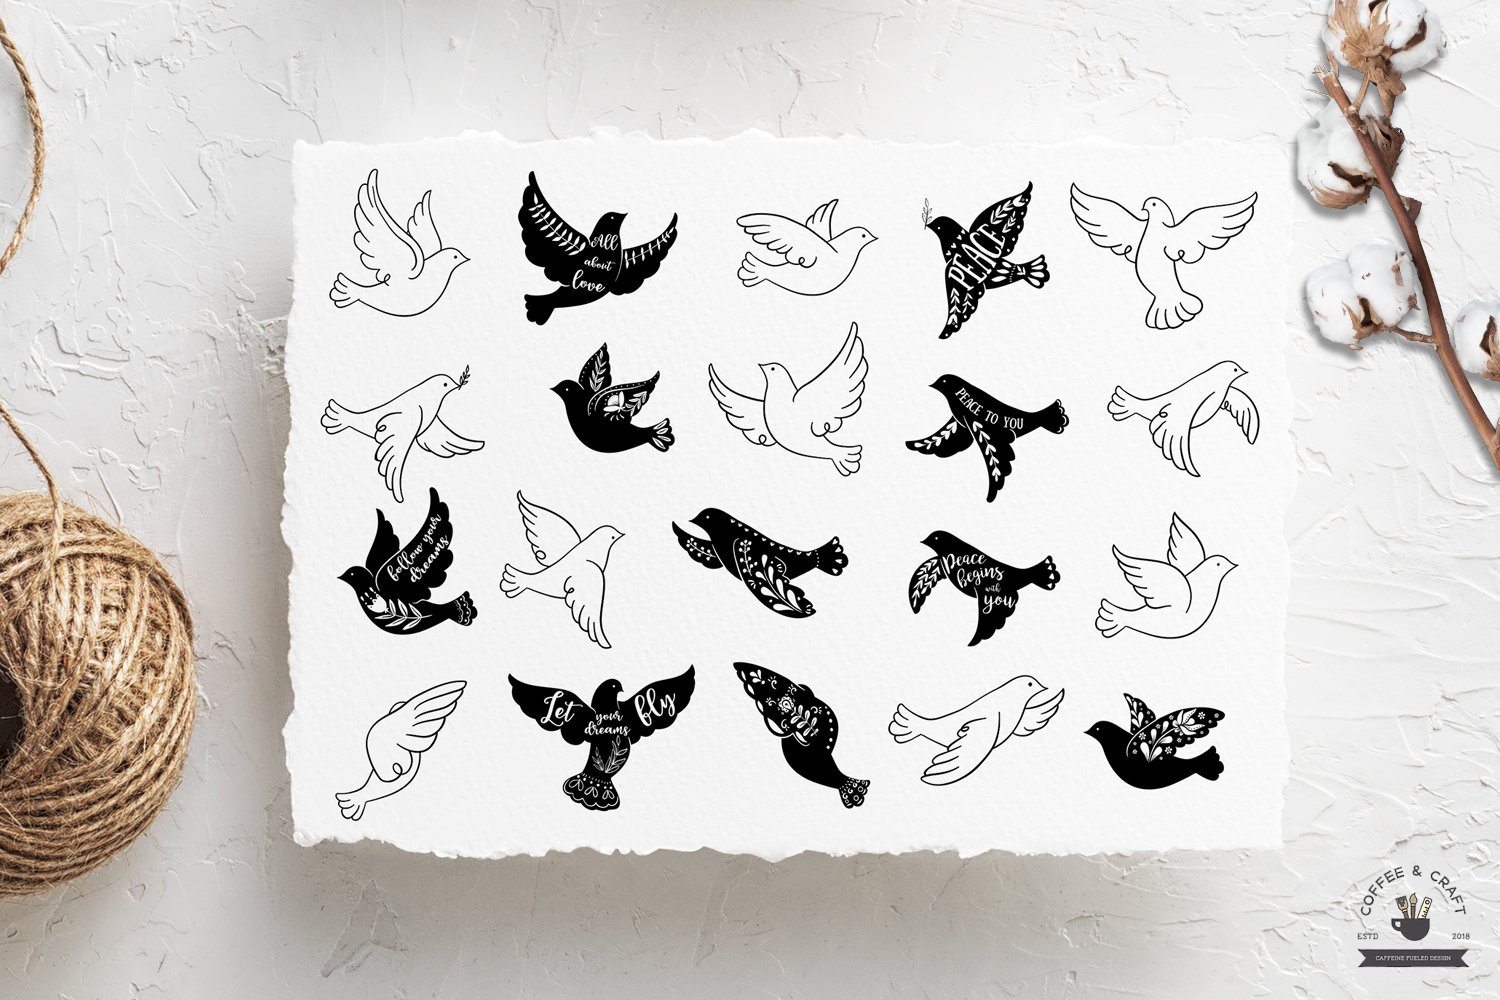 Black and white prints of pigeons in the image.